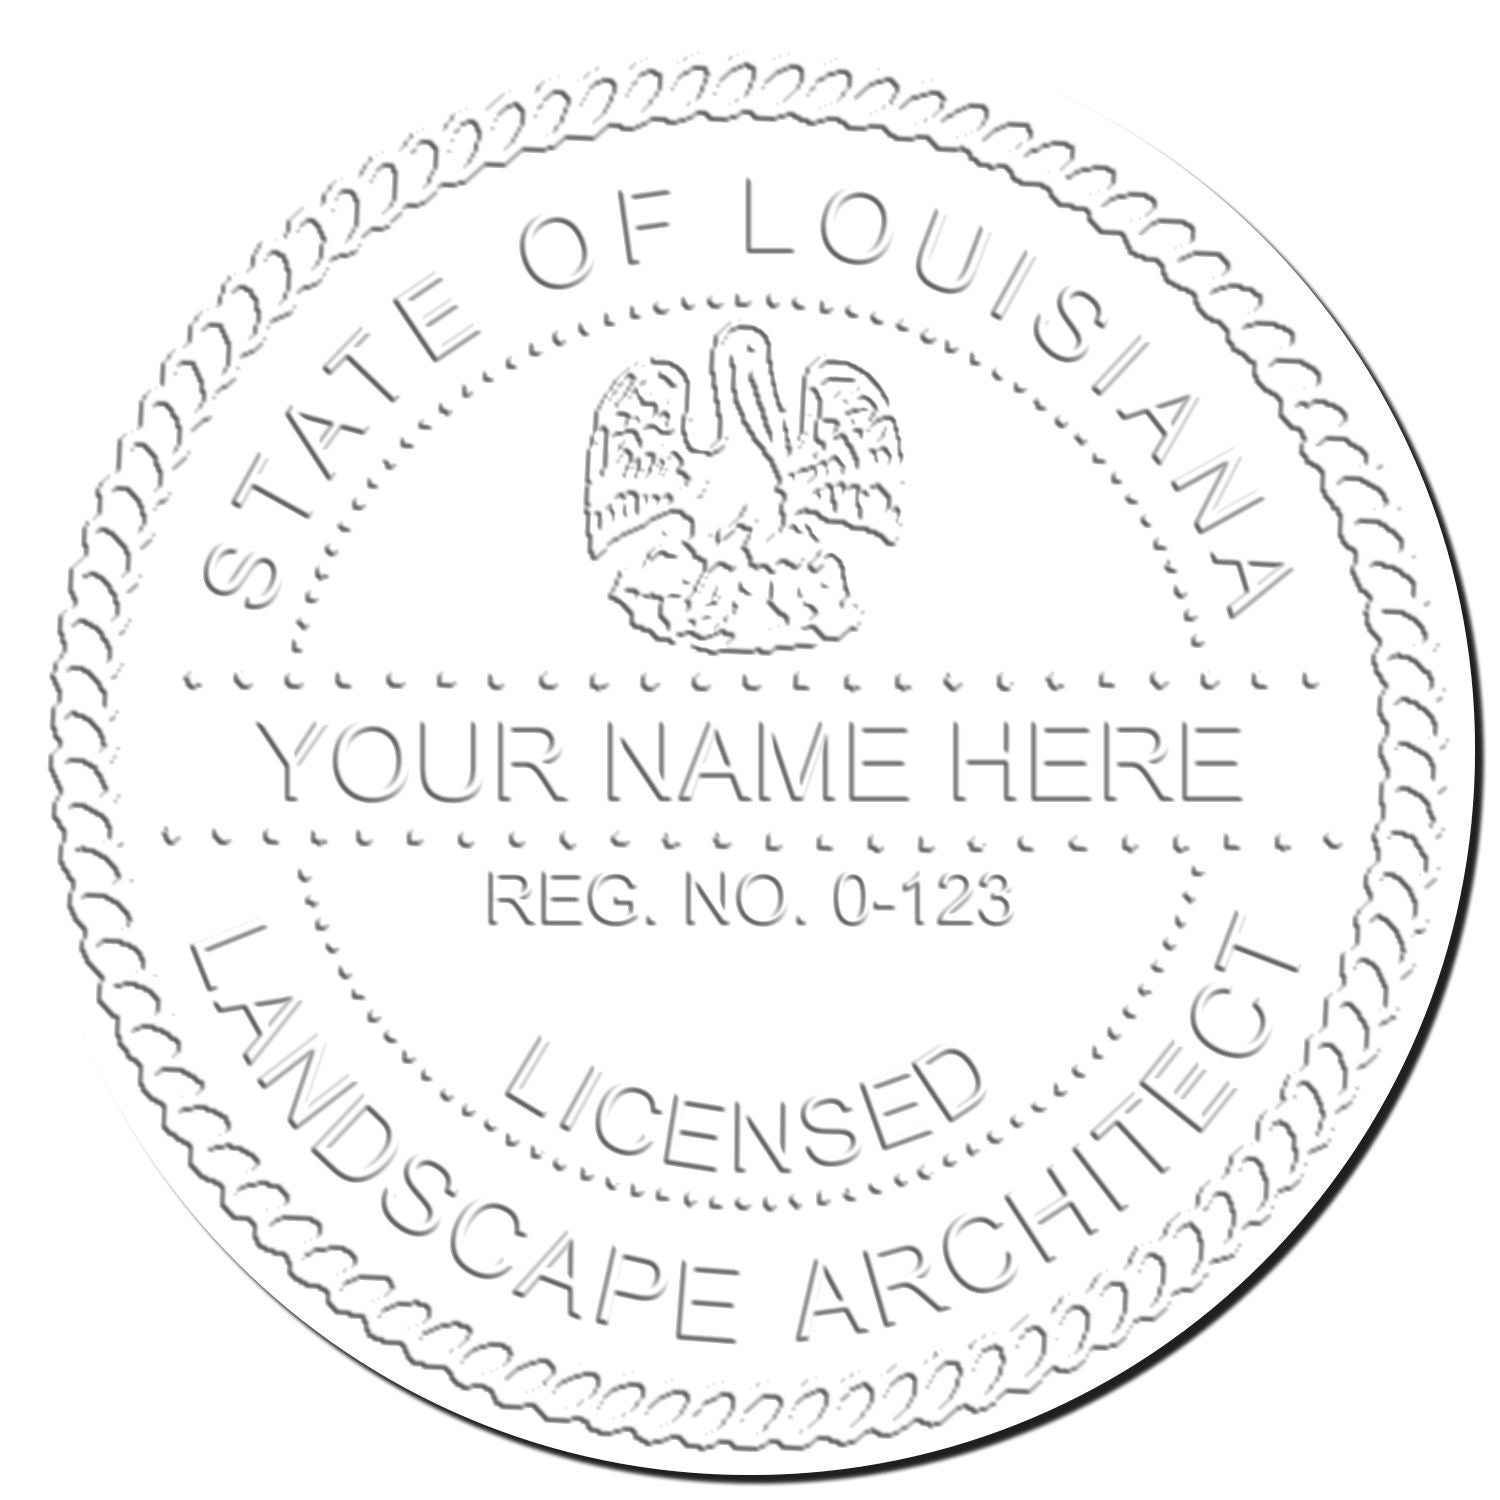 This paper is stamped with a sample imprint of the Louisiana Long Reach Landscape Architect Embossing Stamp, signifying its quality and reliability.